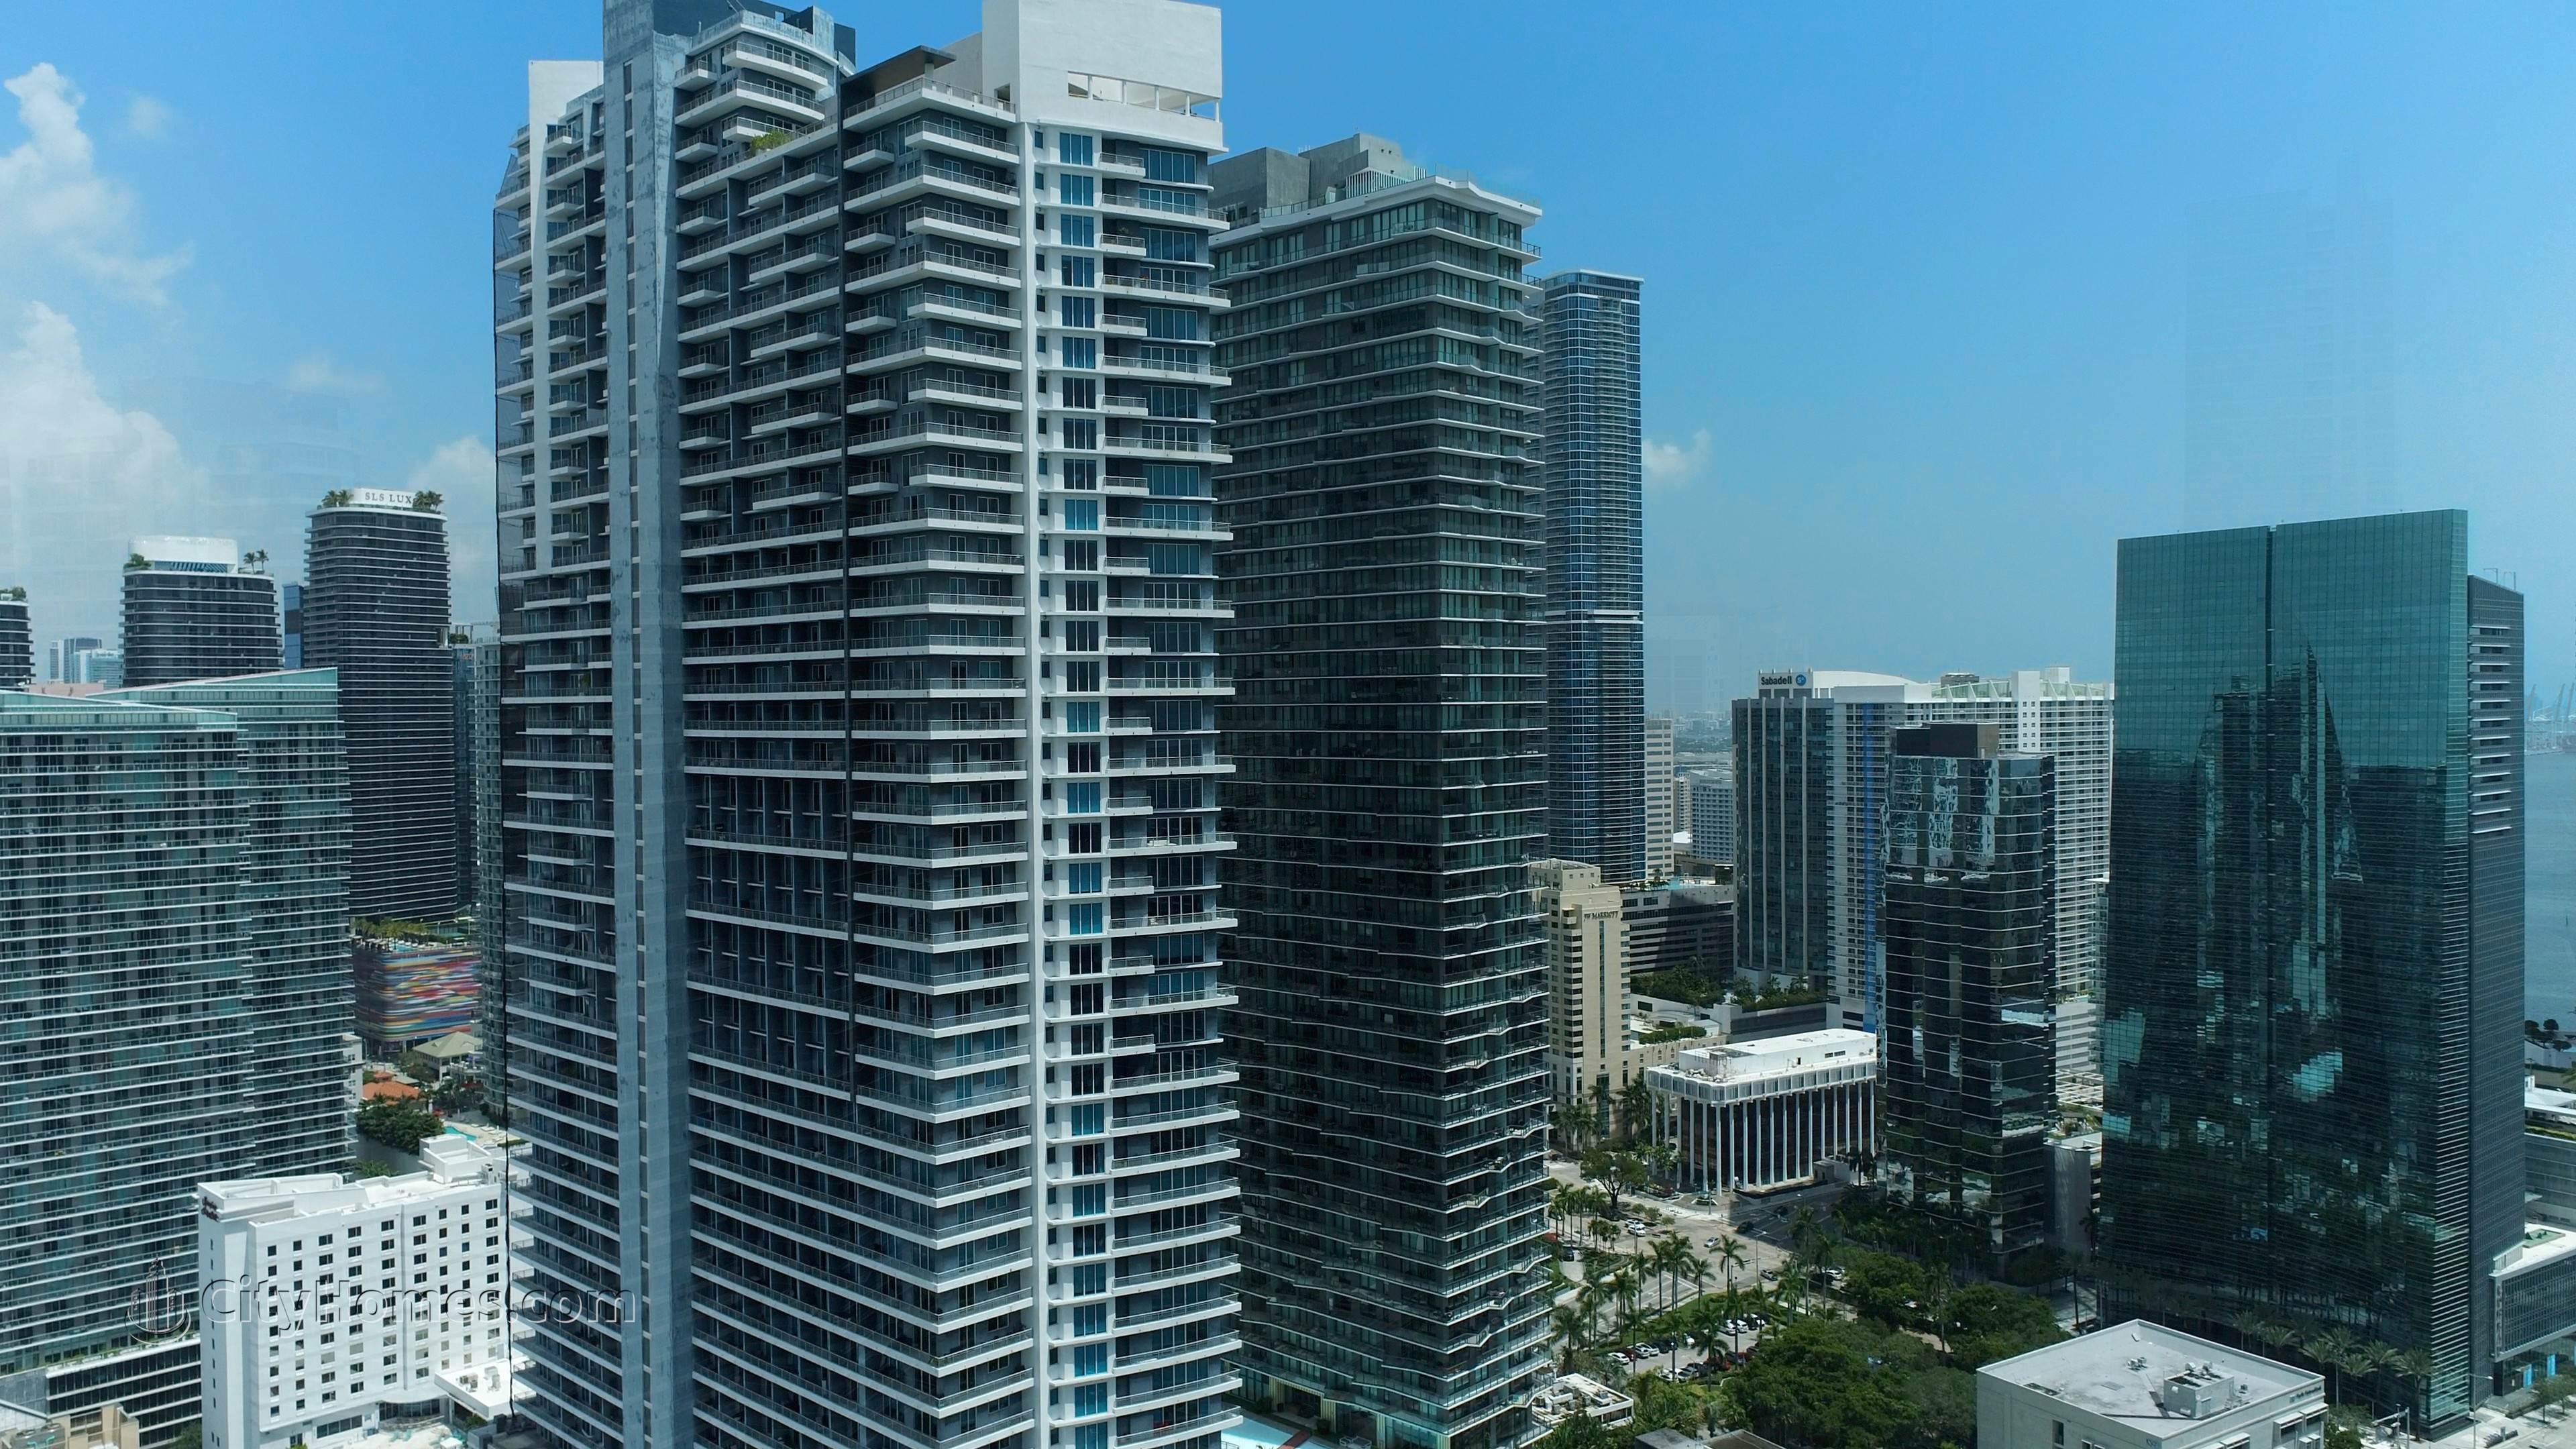 5. Infinity building at 60 SW 13th St, Brickell, Miami, FL 33130